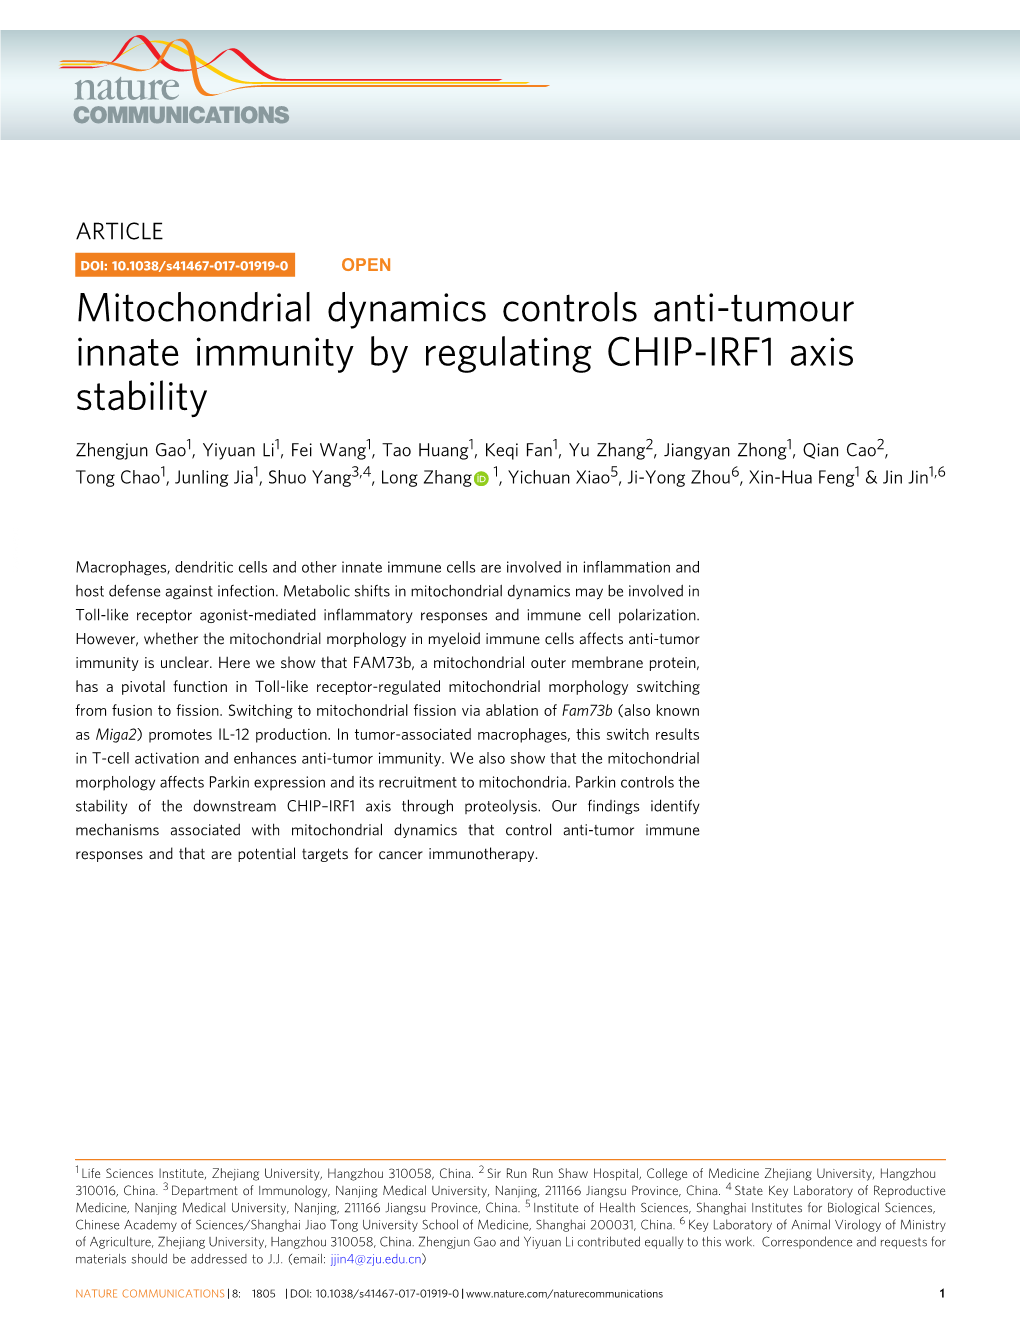 Mitochondrial Dynamics Controls Anti-Tumour Innate Immunity by Regulating CHIP-IRF1 Axis Stability